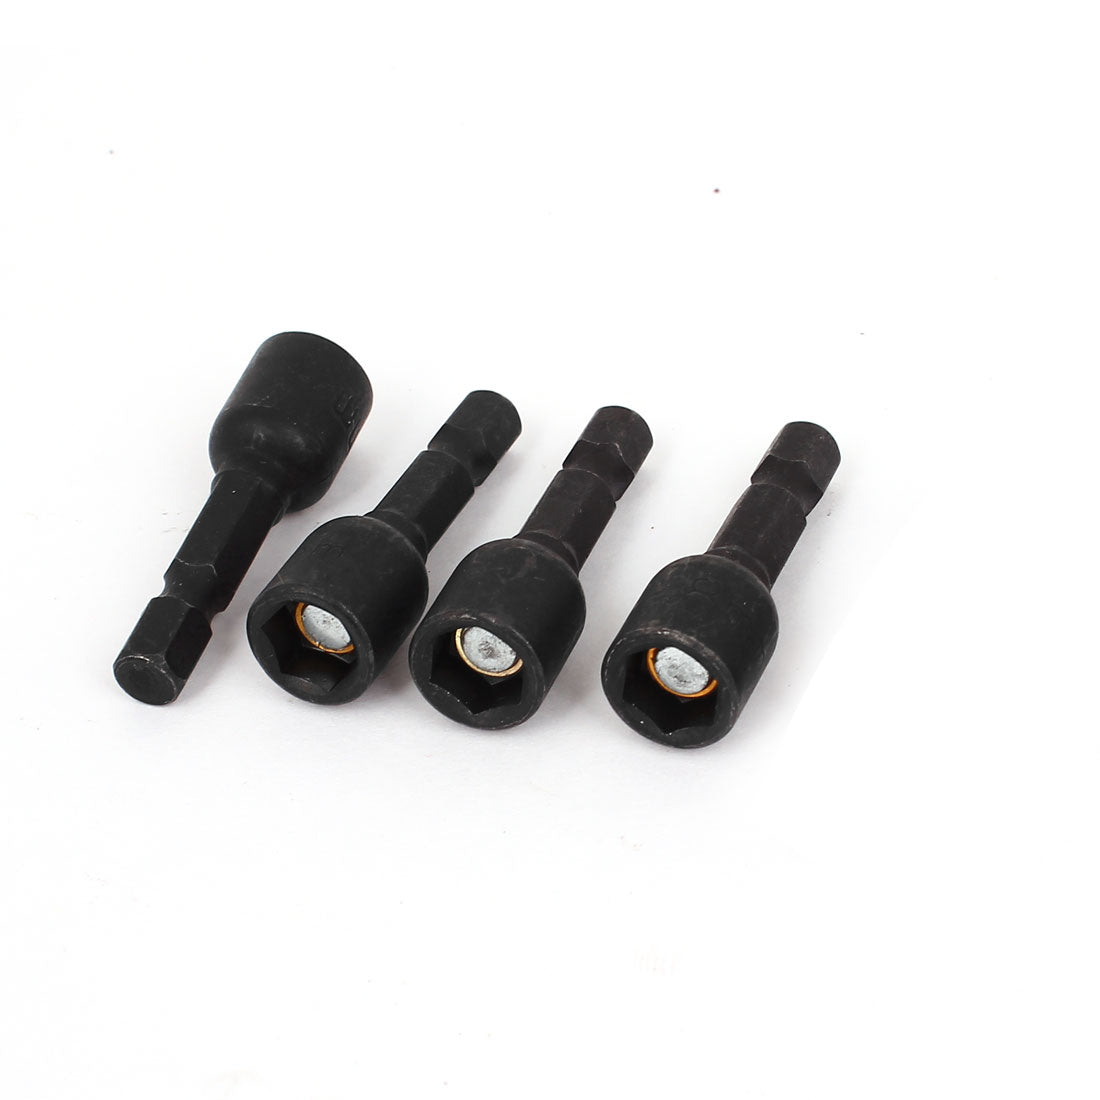 uxcell Uxcell 1/4" Shank 8mm 5/16" Hex Magnetic Nut Driver Bit Socket Adapter Black 4 Pcs